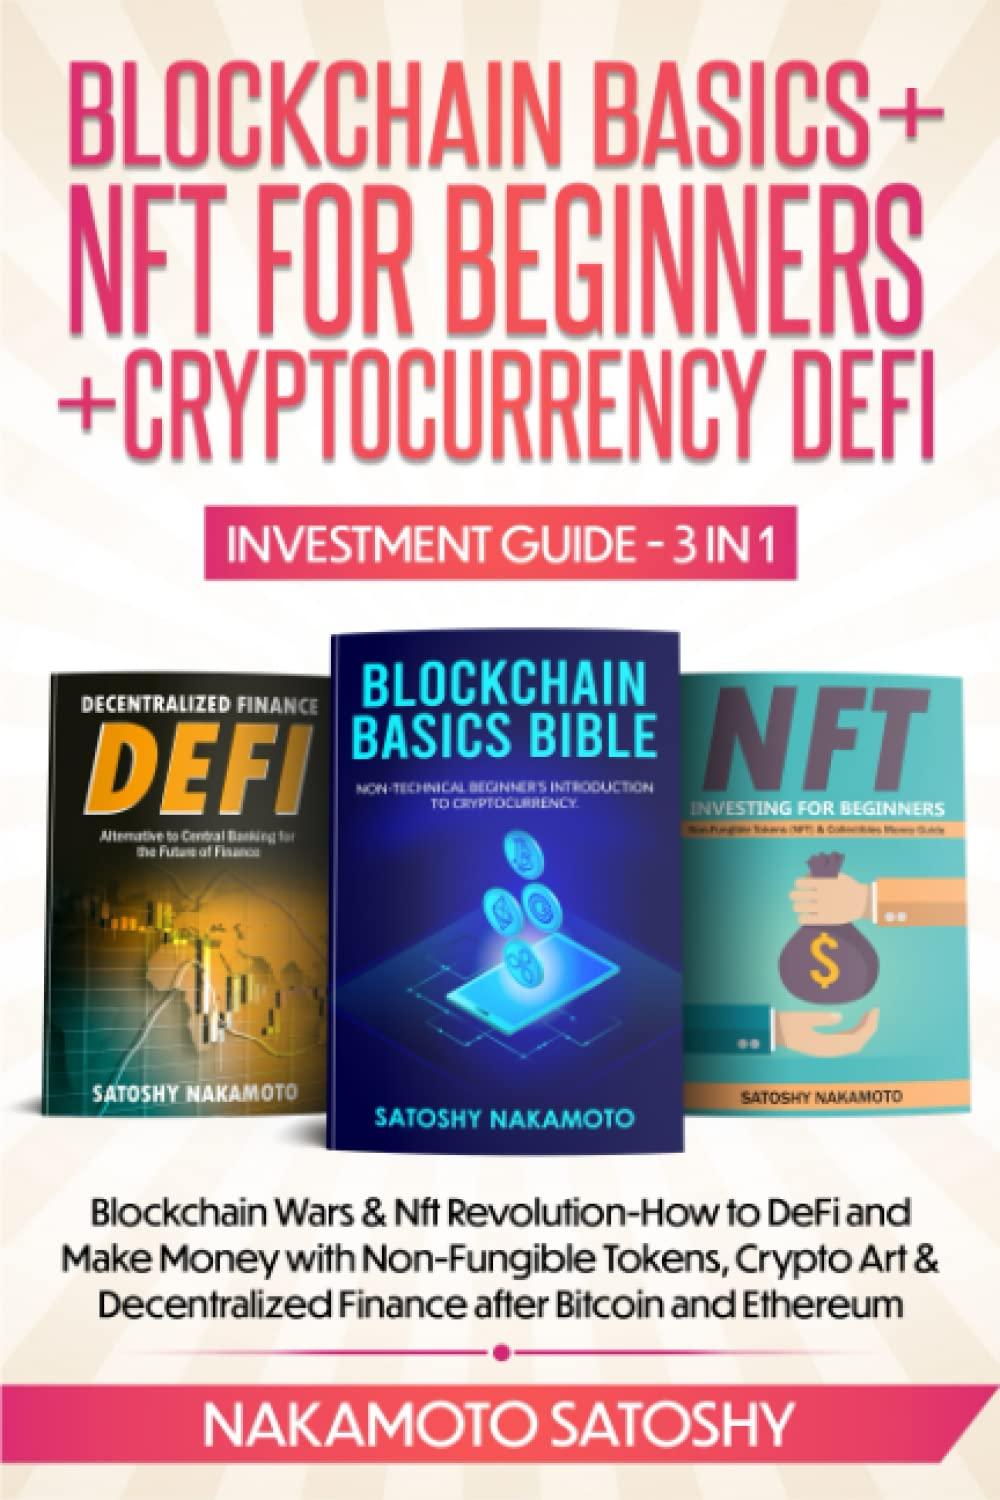 Investor Ideas Updates its Free Crypto / Blockchain Stock Directory for retail investors - NFT stocks included